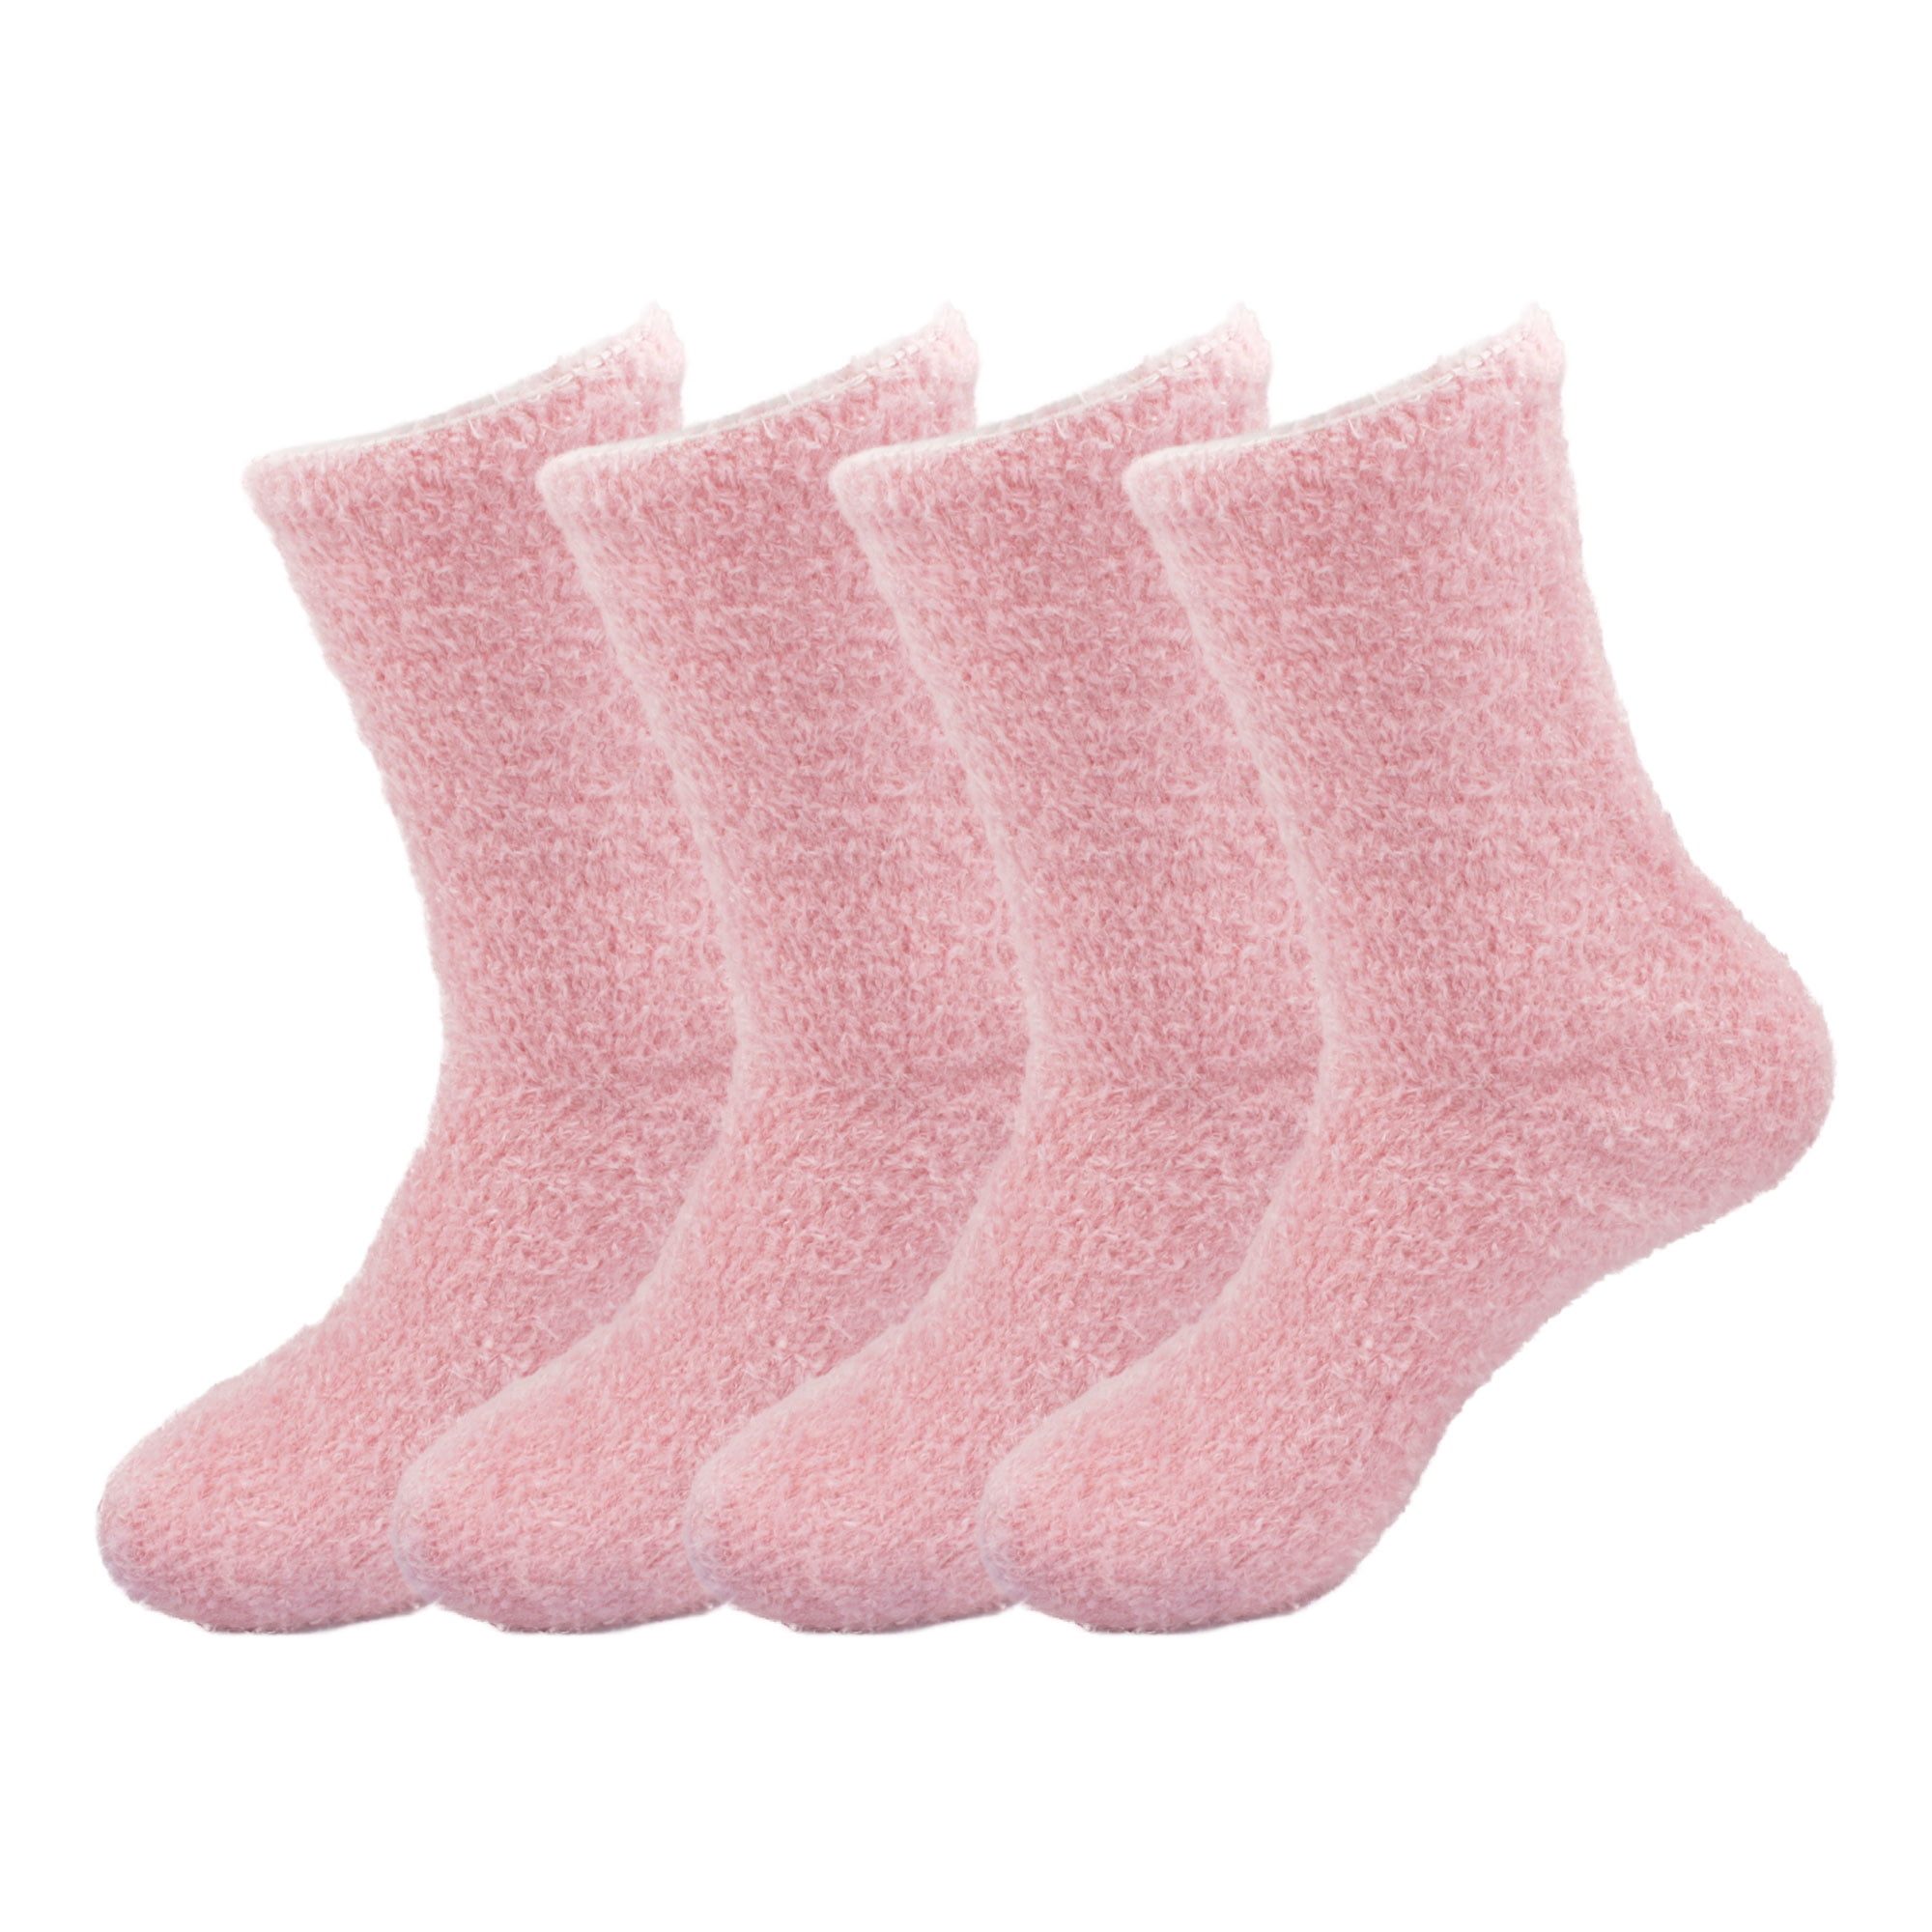 Women's Super Soft and Cozy Feather Light Fuzzy Home Socks - Tinkerbell  Pink - 4 Pair Value Pack - Size 10-13